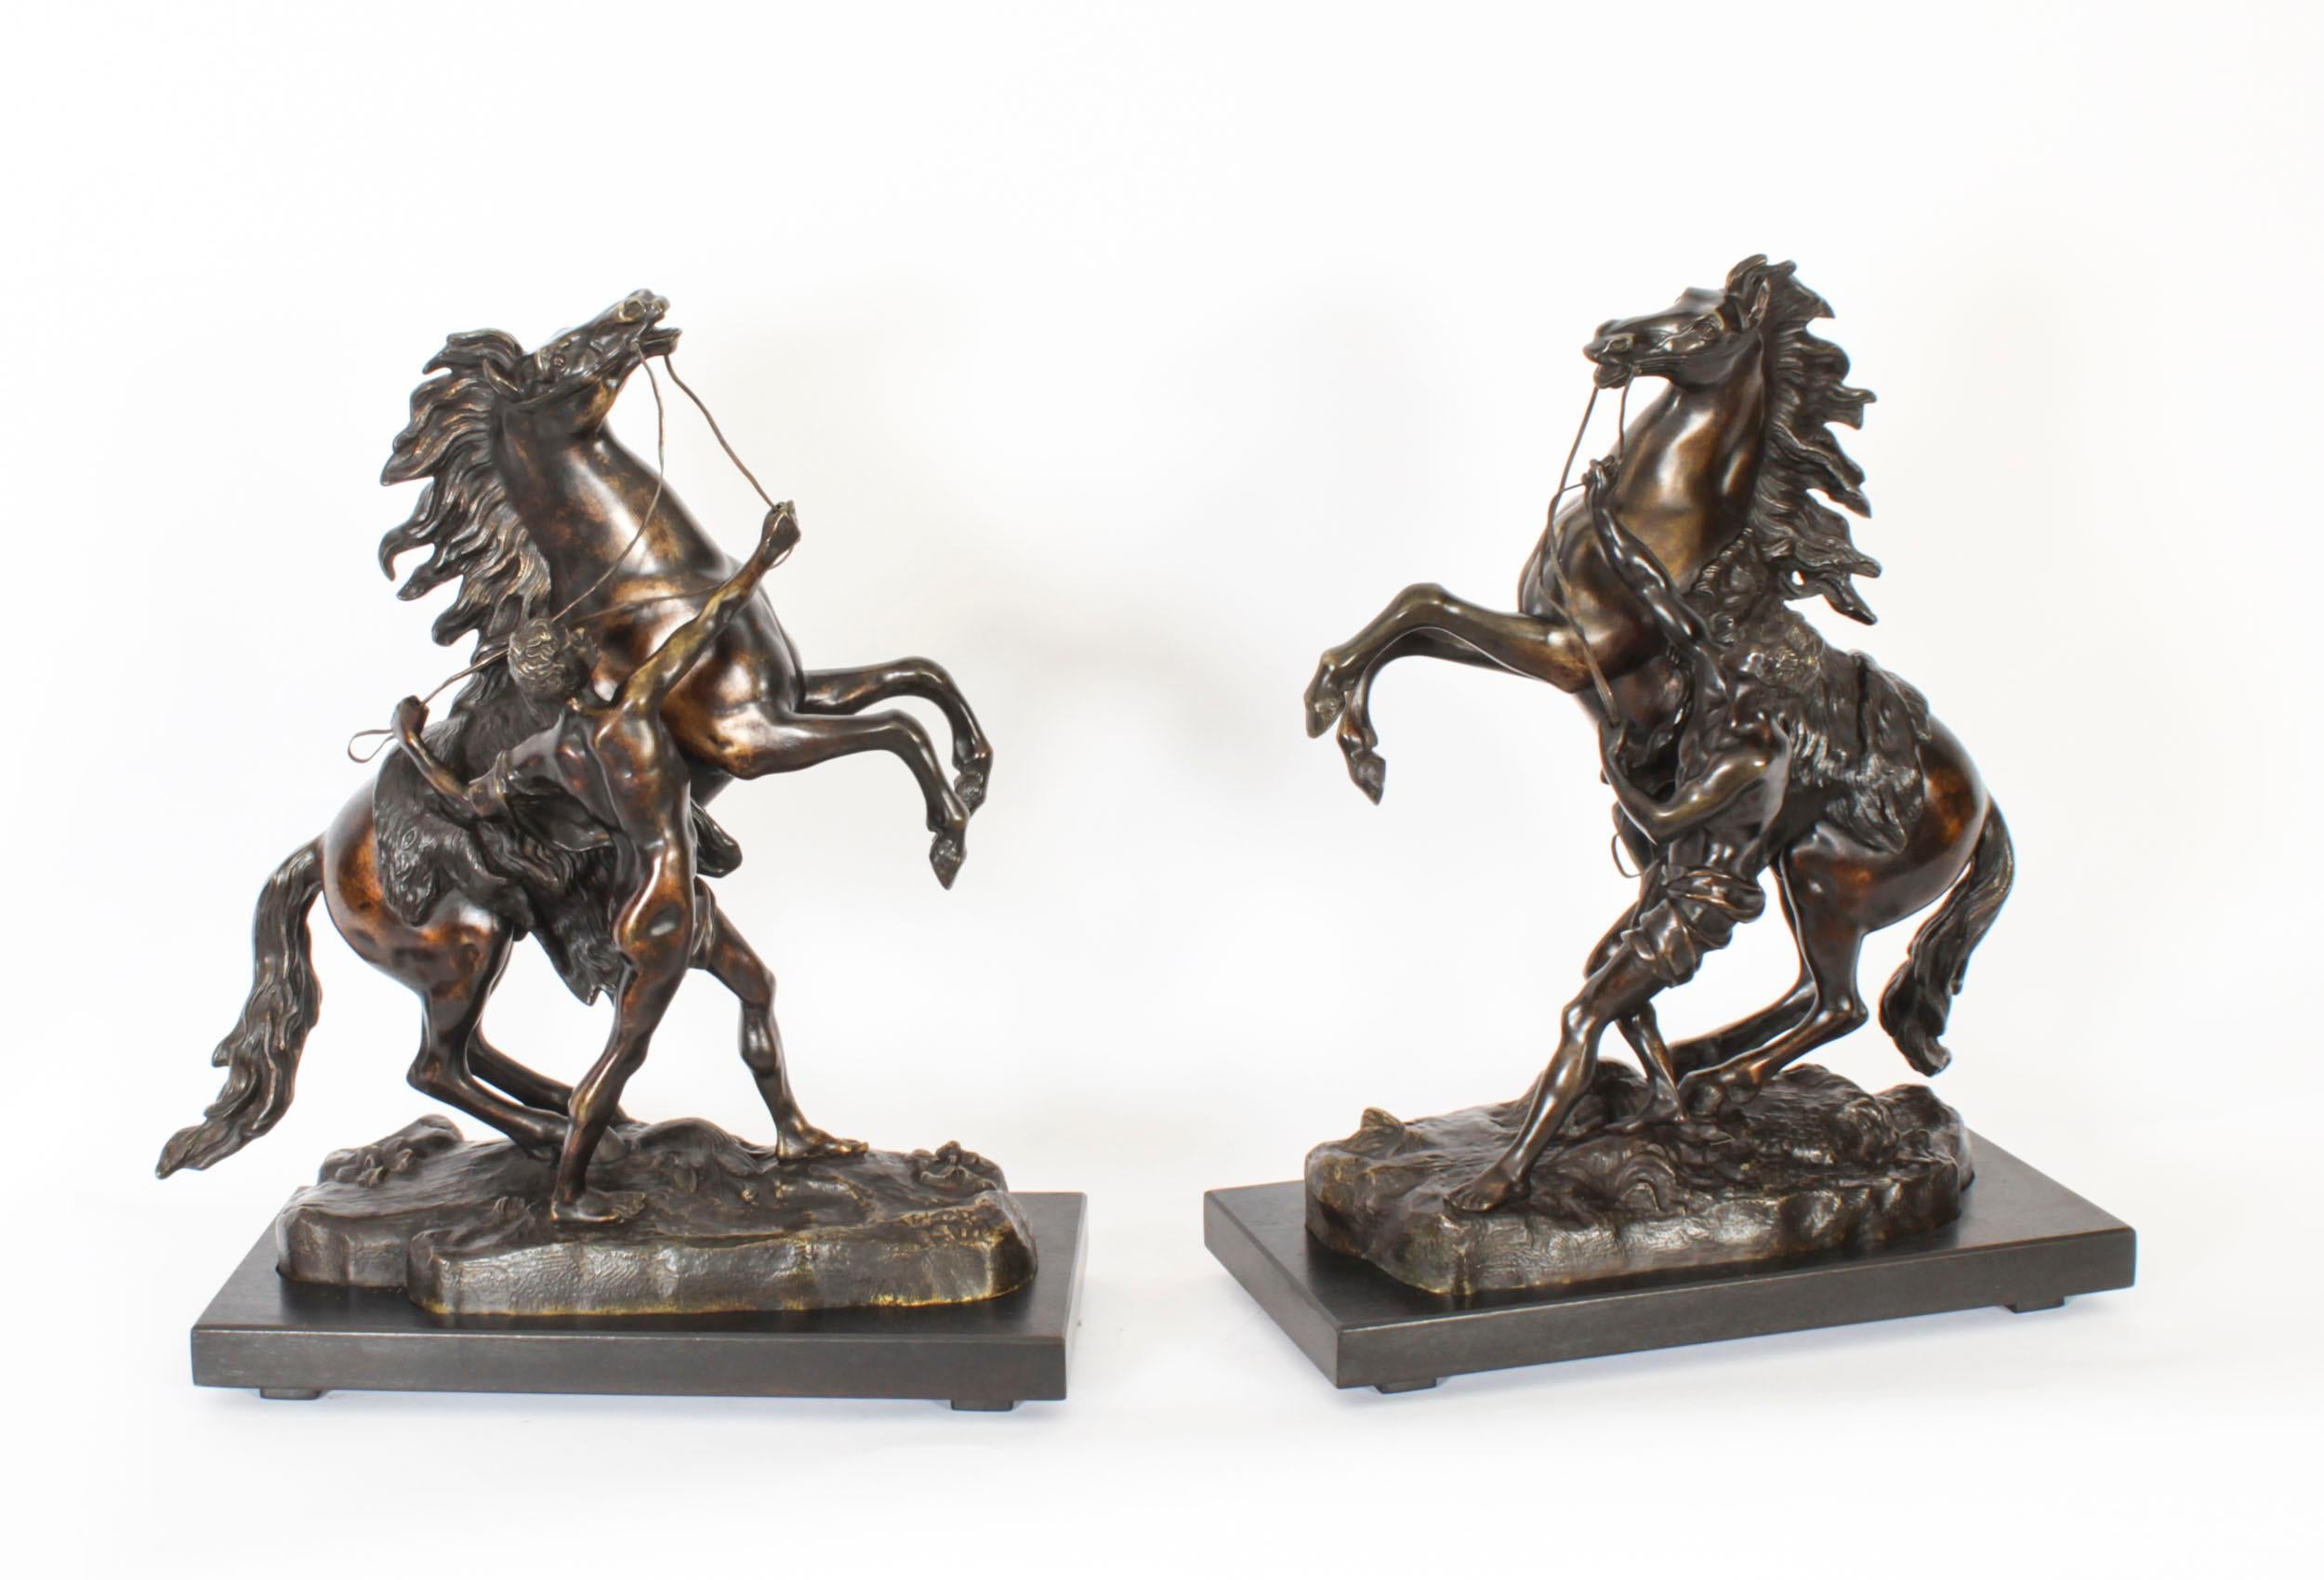 This is a beautiful antique Grand Tour pair of French patinated-bronze sculptures of Marly Horses, Circa 1880 in date.
 
The Marly Horses were commissioned by Louis XV of France sculpted in Carrara marble by Guillaume Coustou in 1743 to 1745,